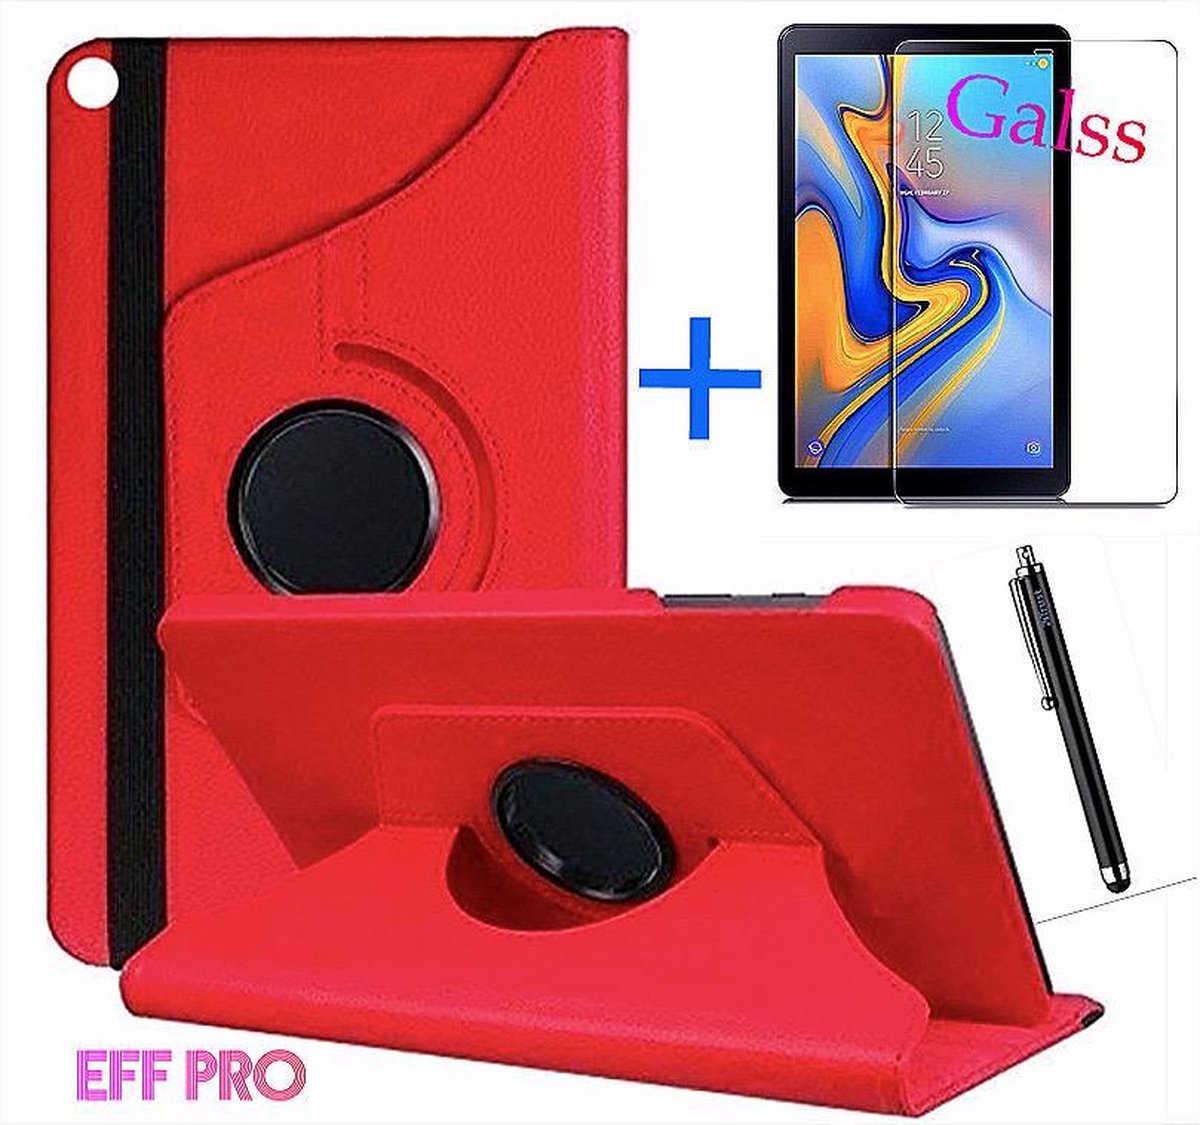 Samsung Galaxy Tab A 10.1 (2019) T510 / T515, HiCHiCO Tablet Hoes met 360° draaistand Cover Tablet hoesje Rood en Stylus Pen + Screen Protector